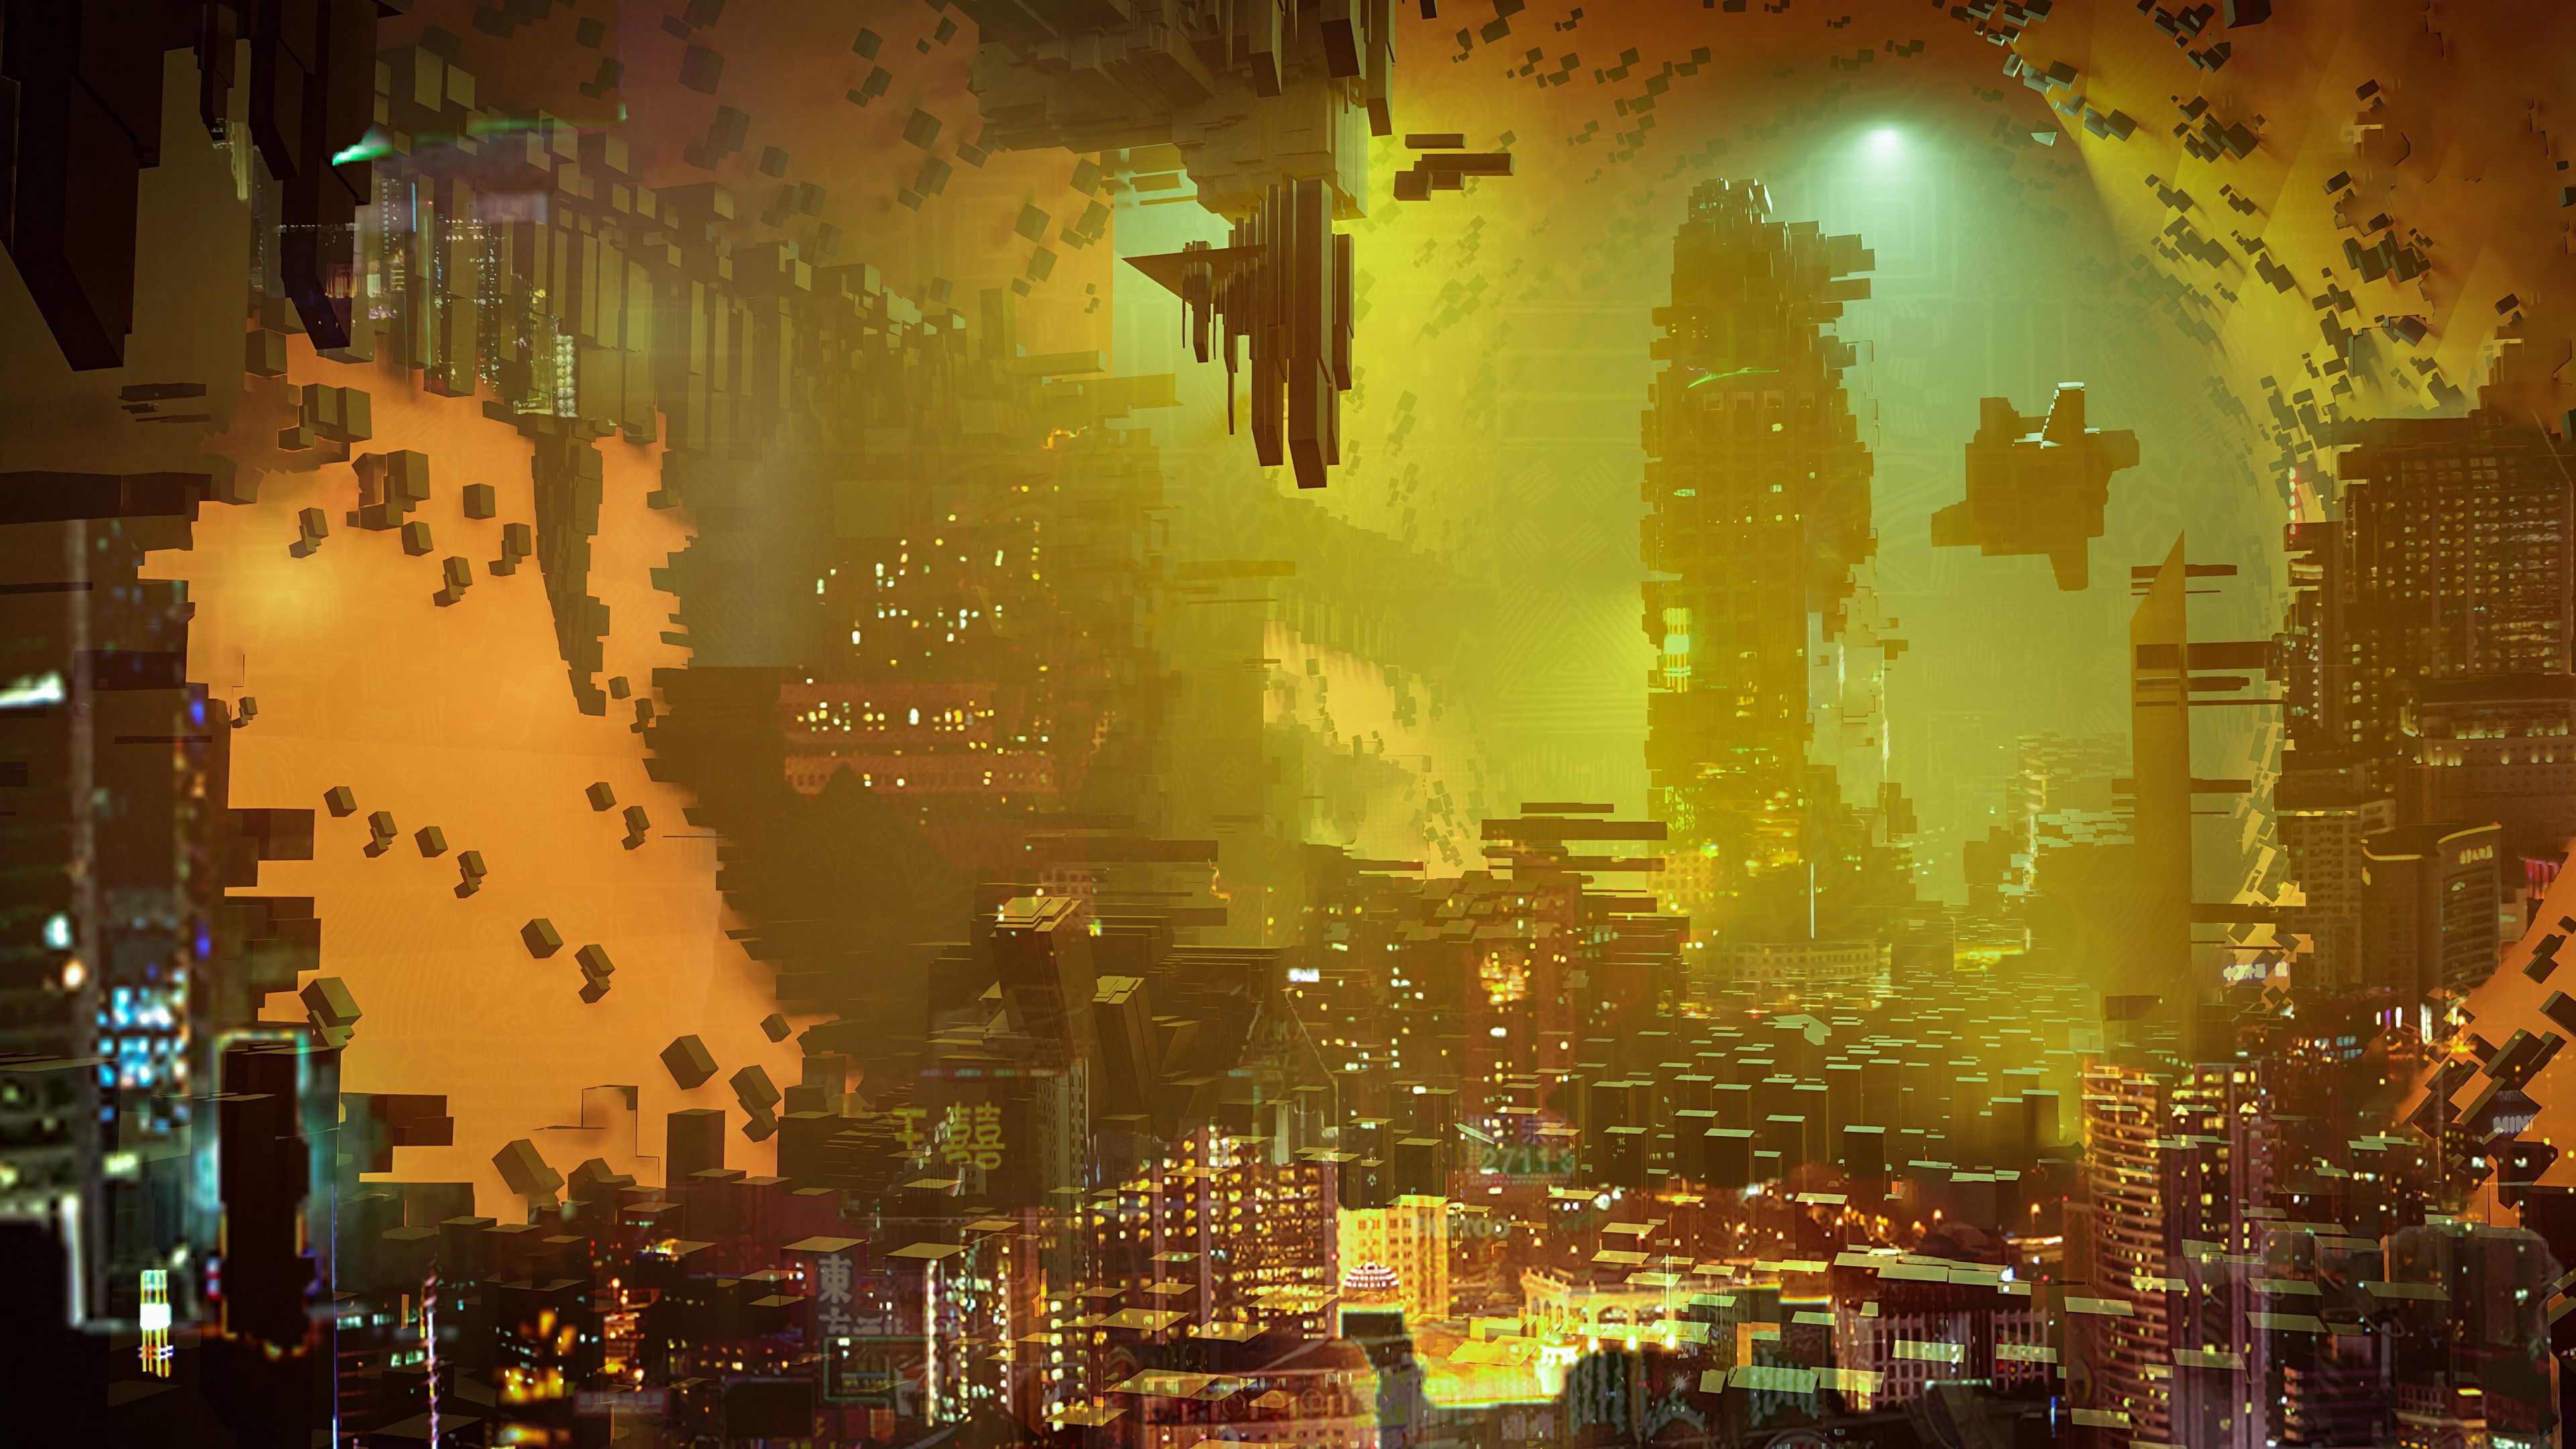 Daily Wallpaper - 💬 City Of Future [3840x2160]. Seen here